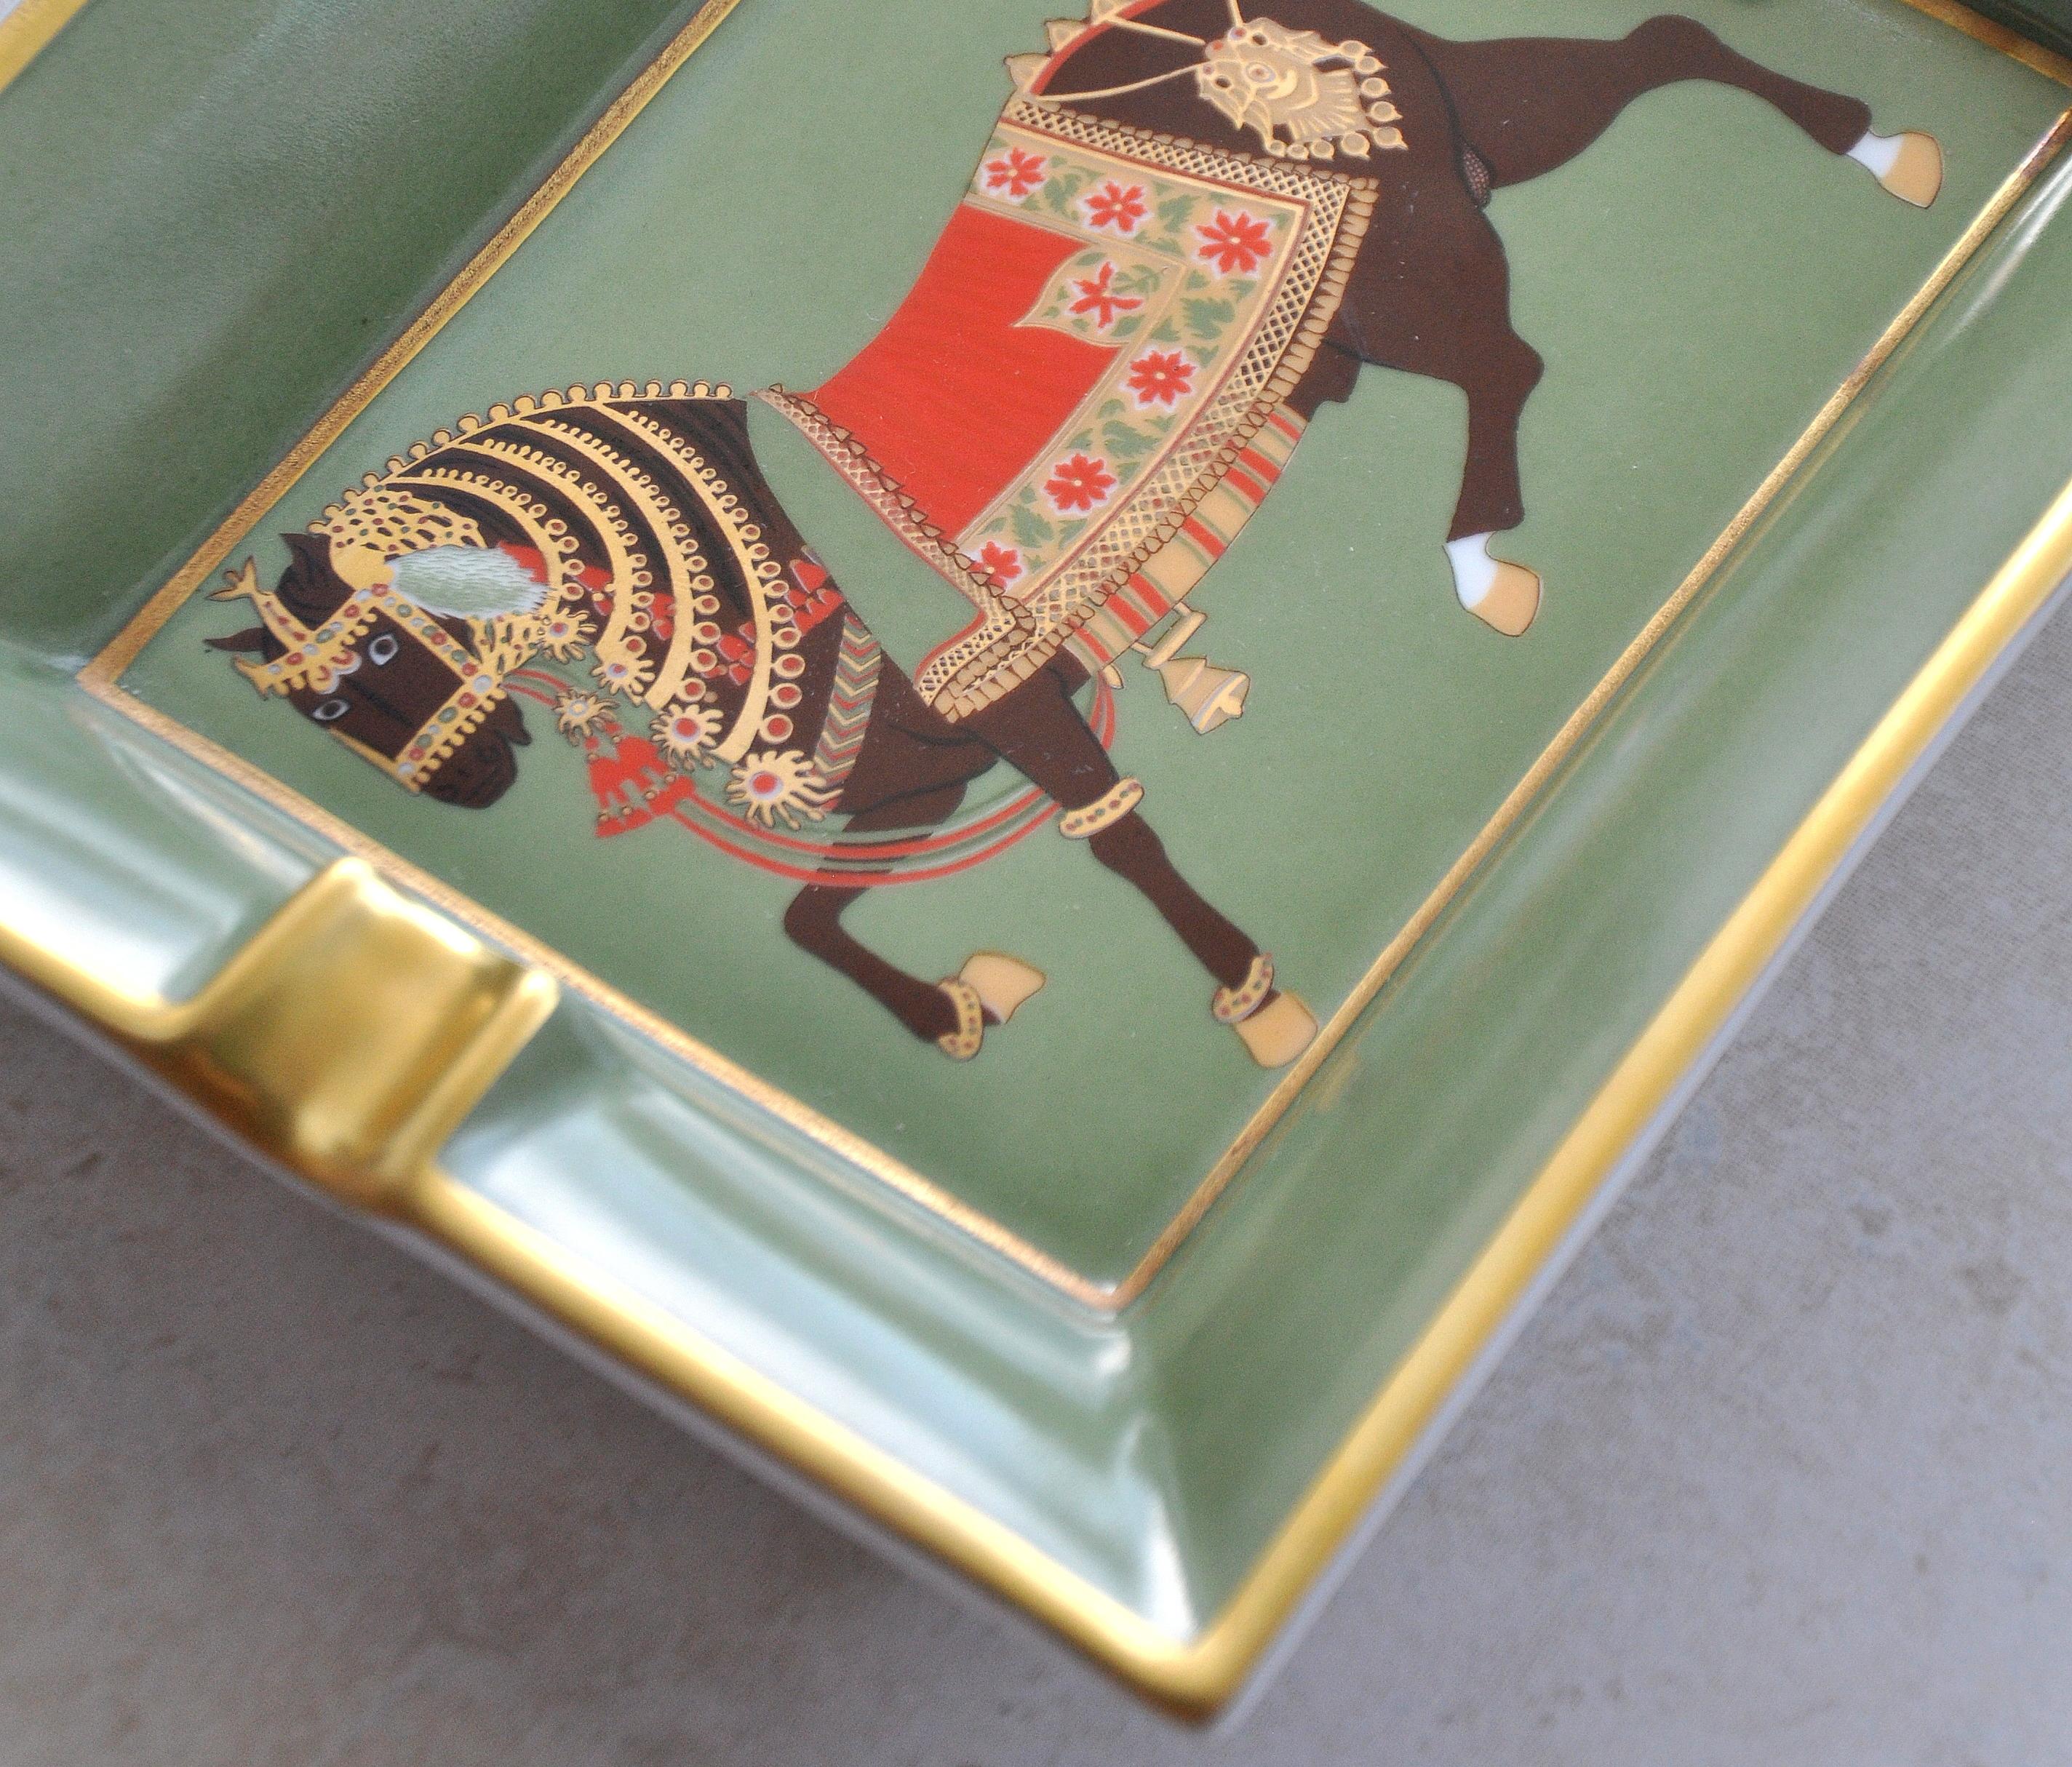 Fine French gilt porcelain cigar ashtray from the Hermès Cheval d'Apparat collection with Classic equestrian motif depicting an exquisitely detailed brown horse on a beautiful green background with abundant gilding, intricate details and suede on